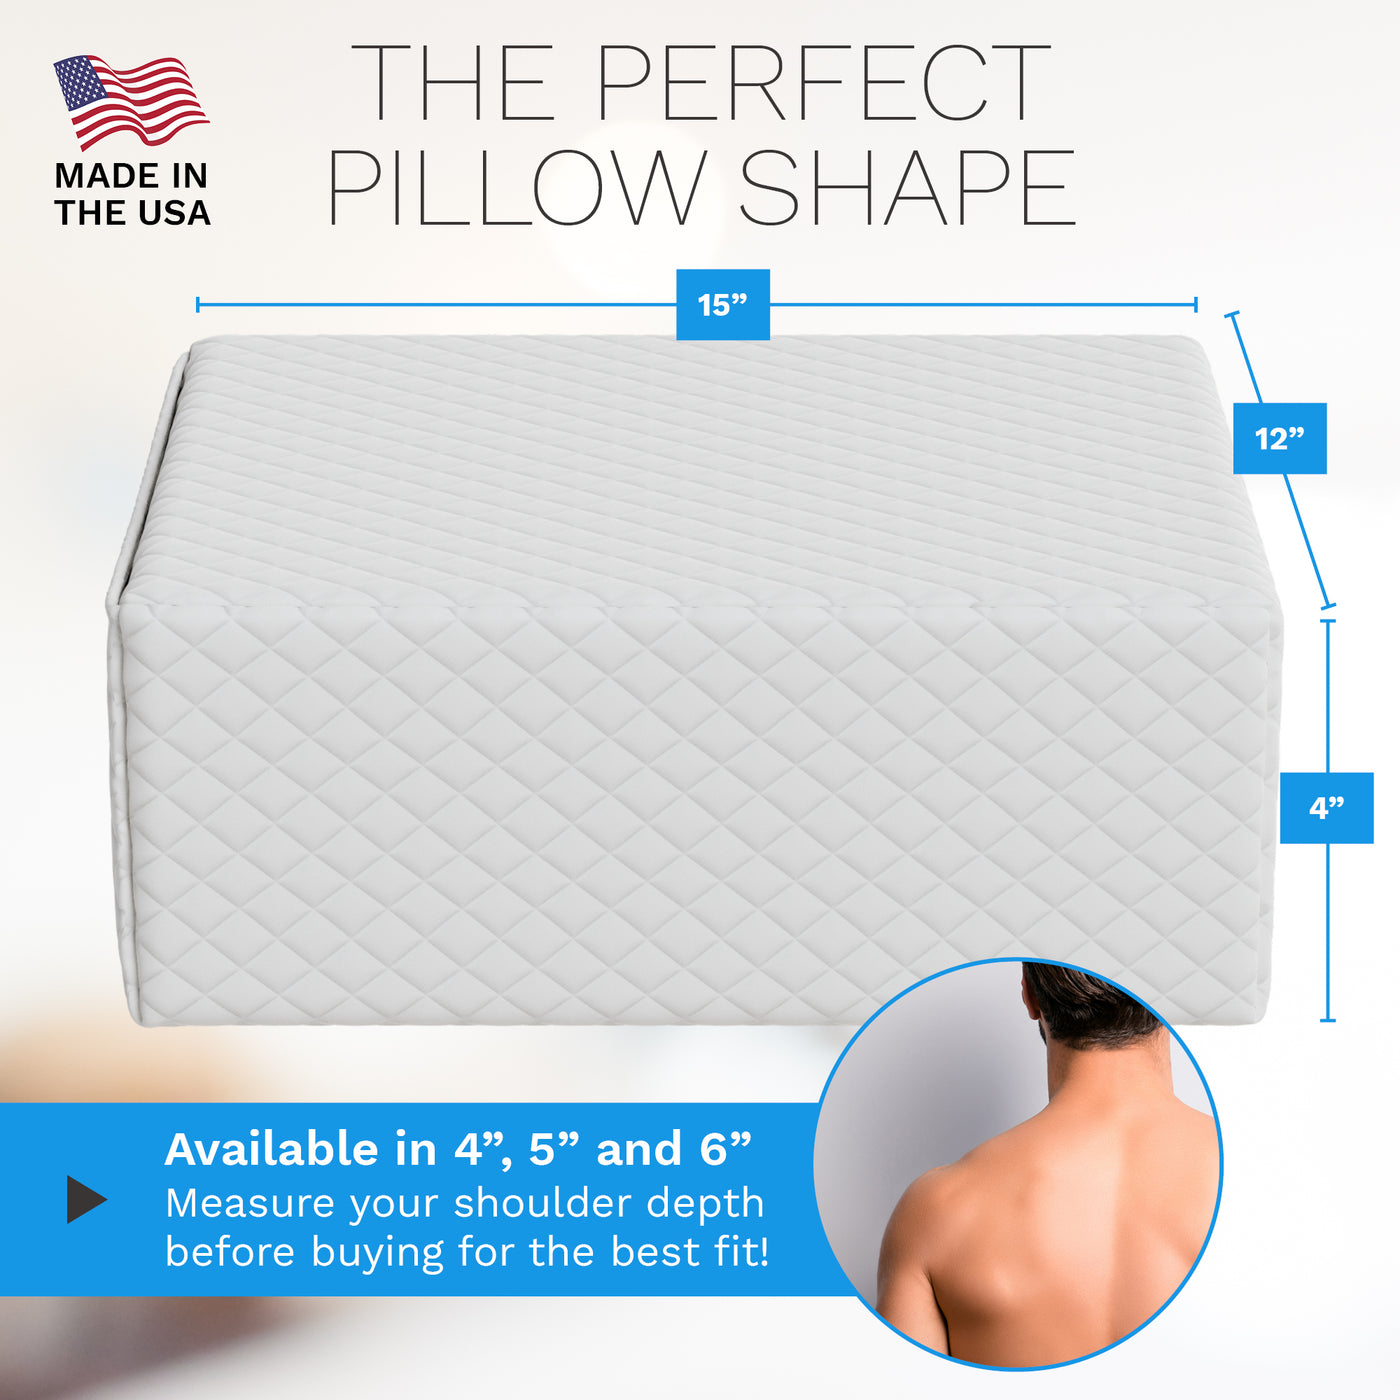 Square pillow for side sleepers